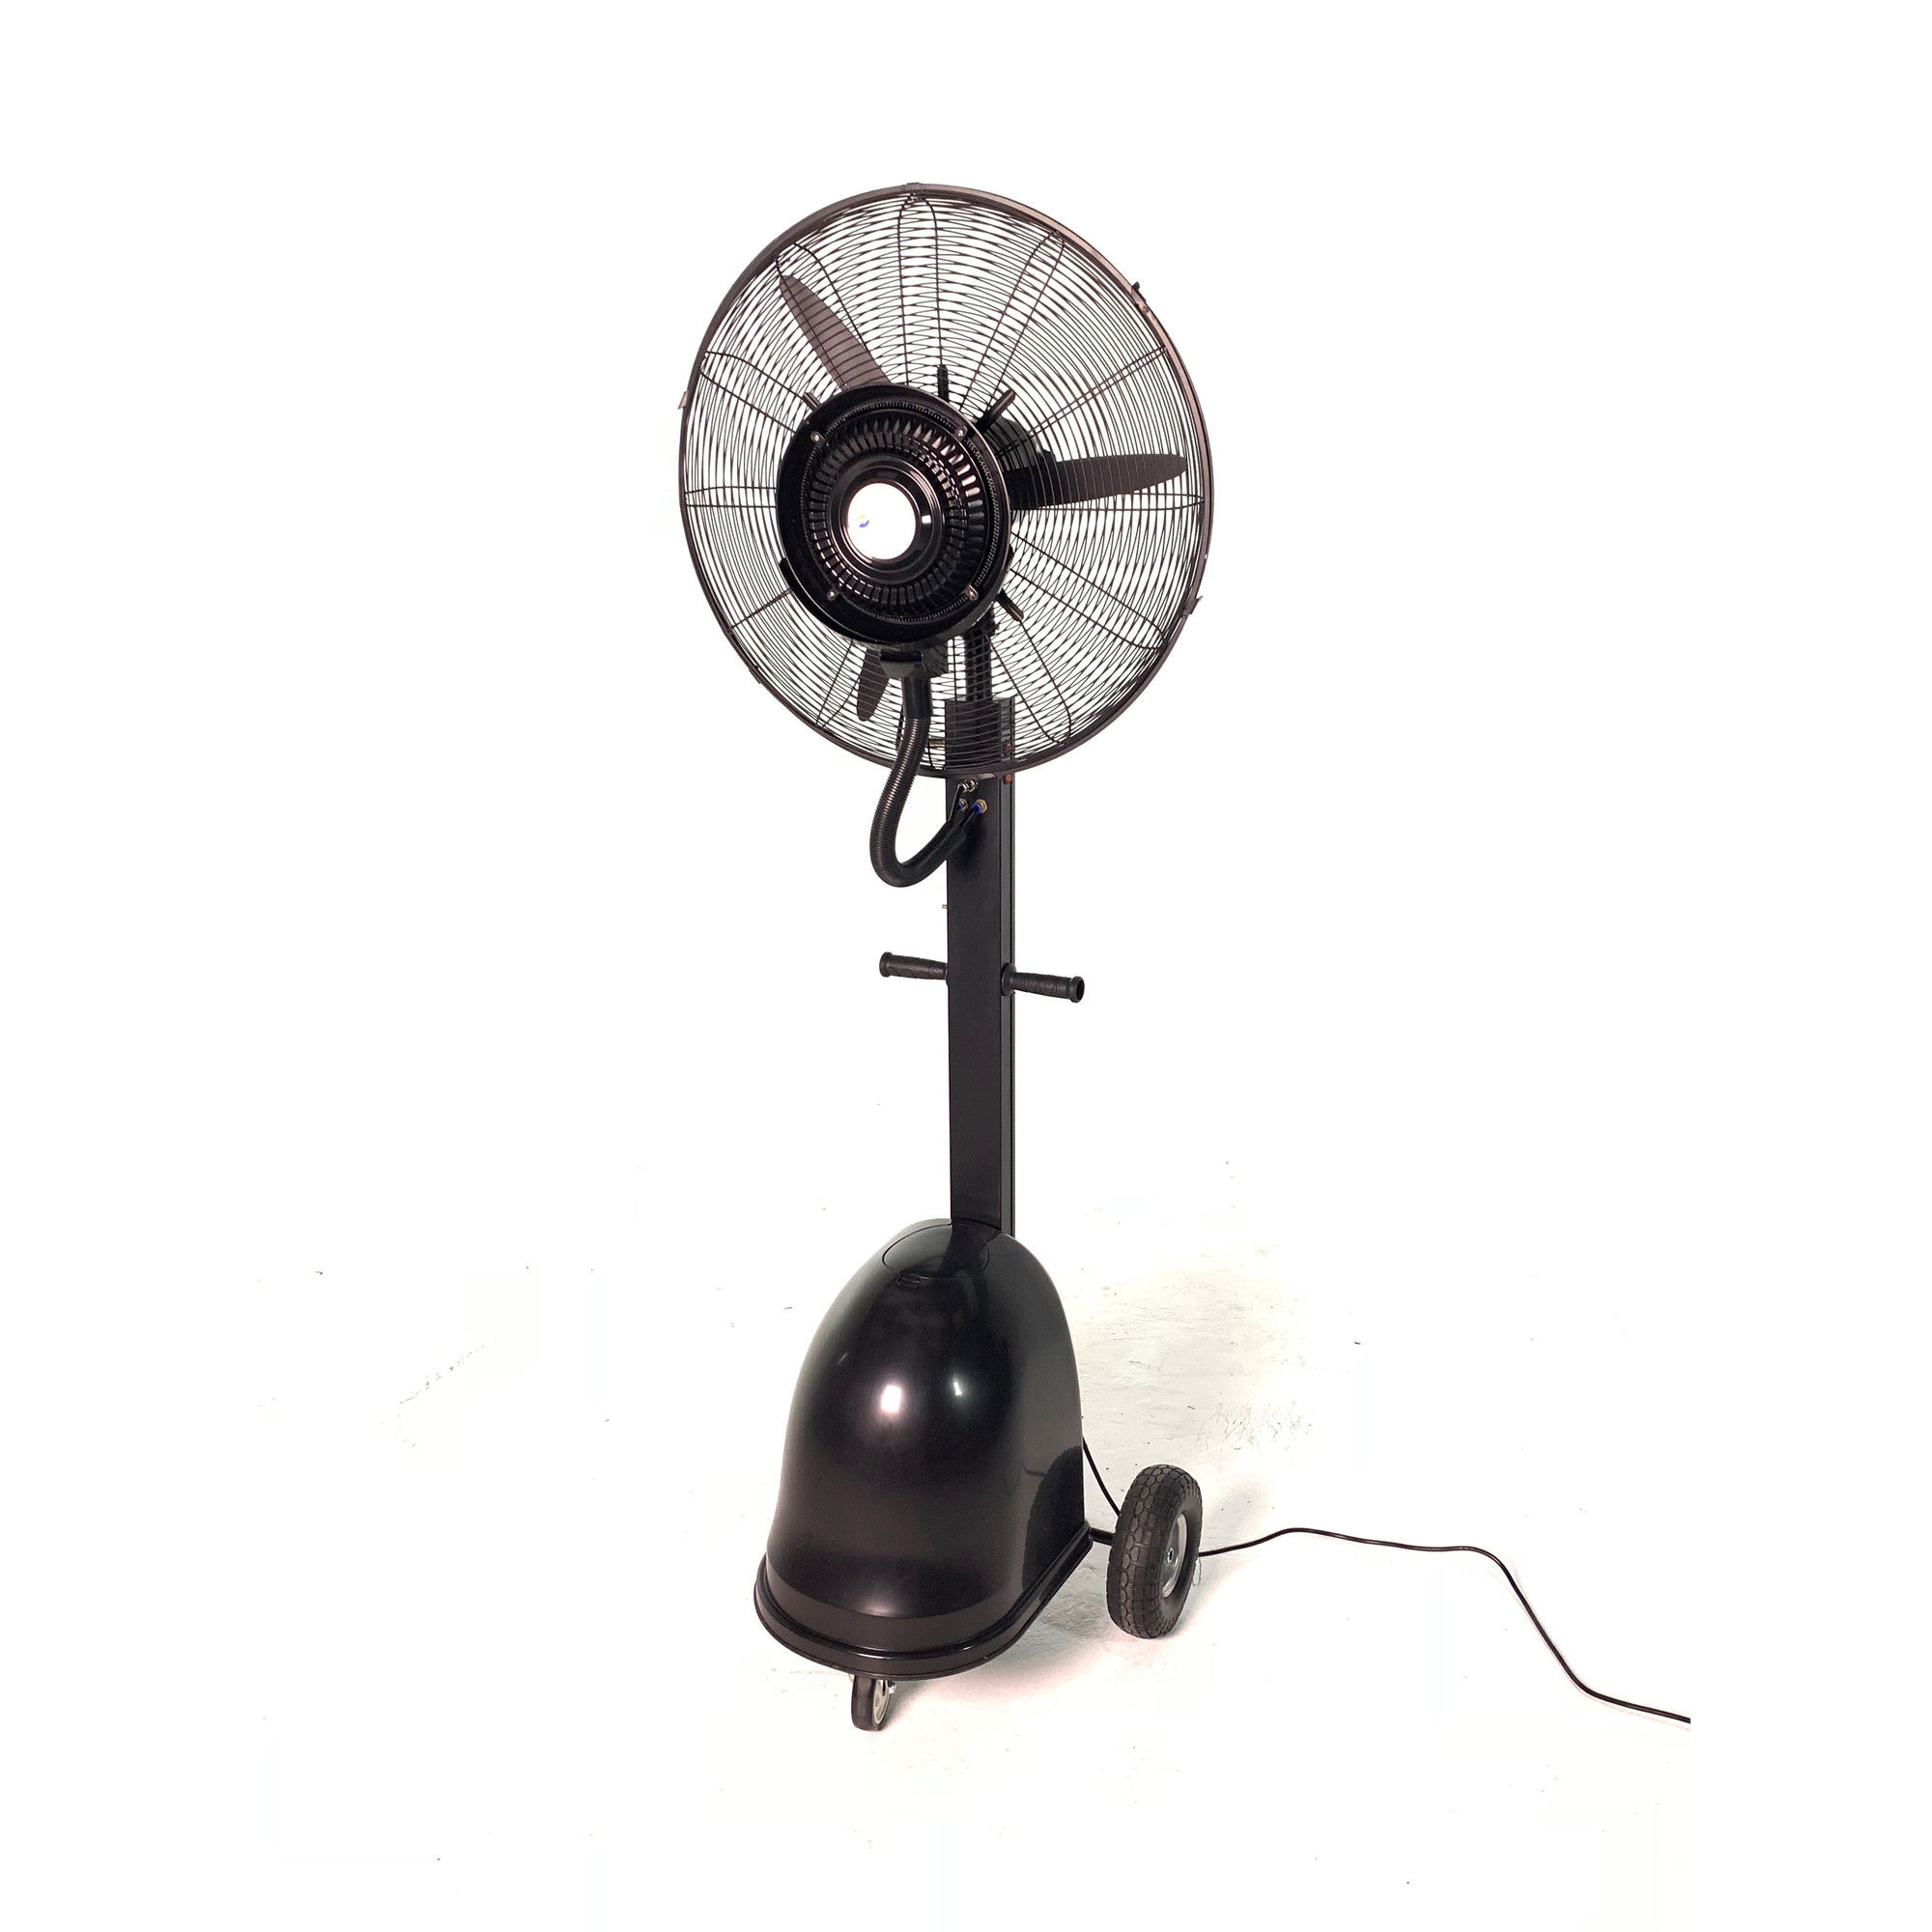 Cool-Off, Portable Misting Fan, Fan Diameter 26 in, Air Delivery 8400 cfm, Oscillating, Model IB26